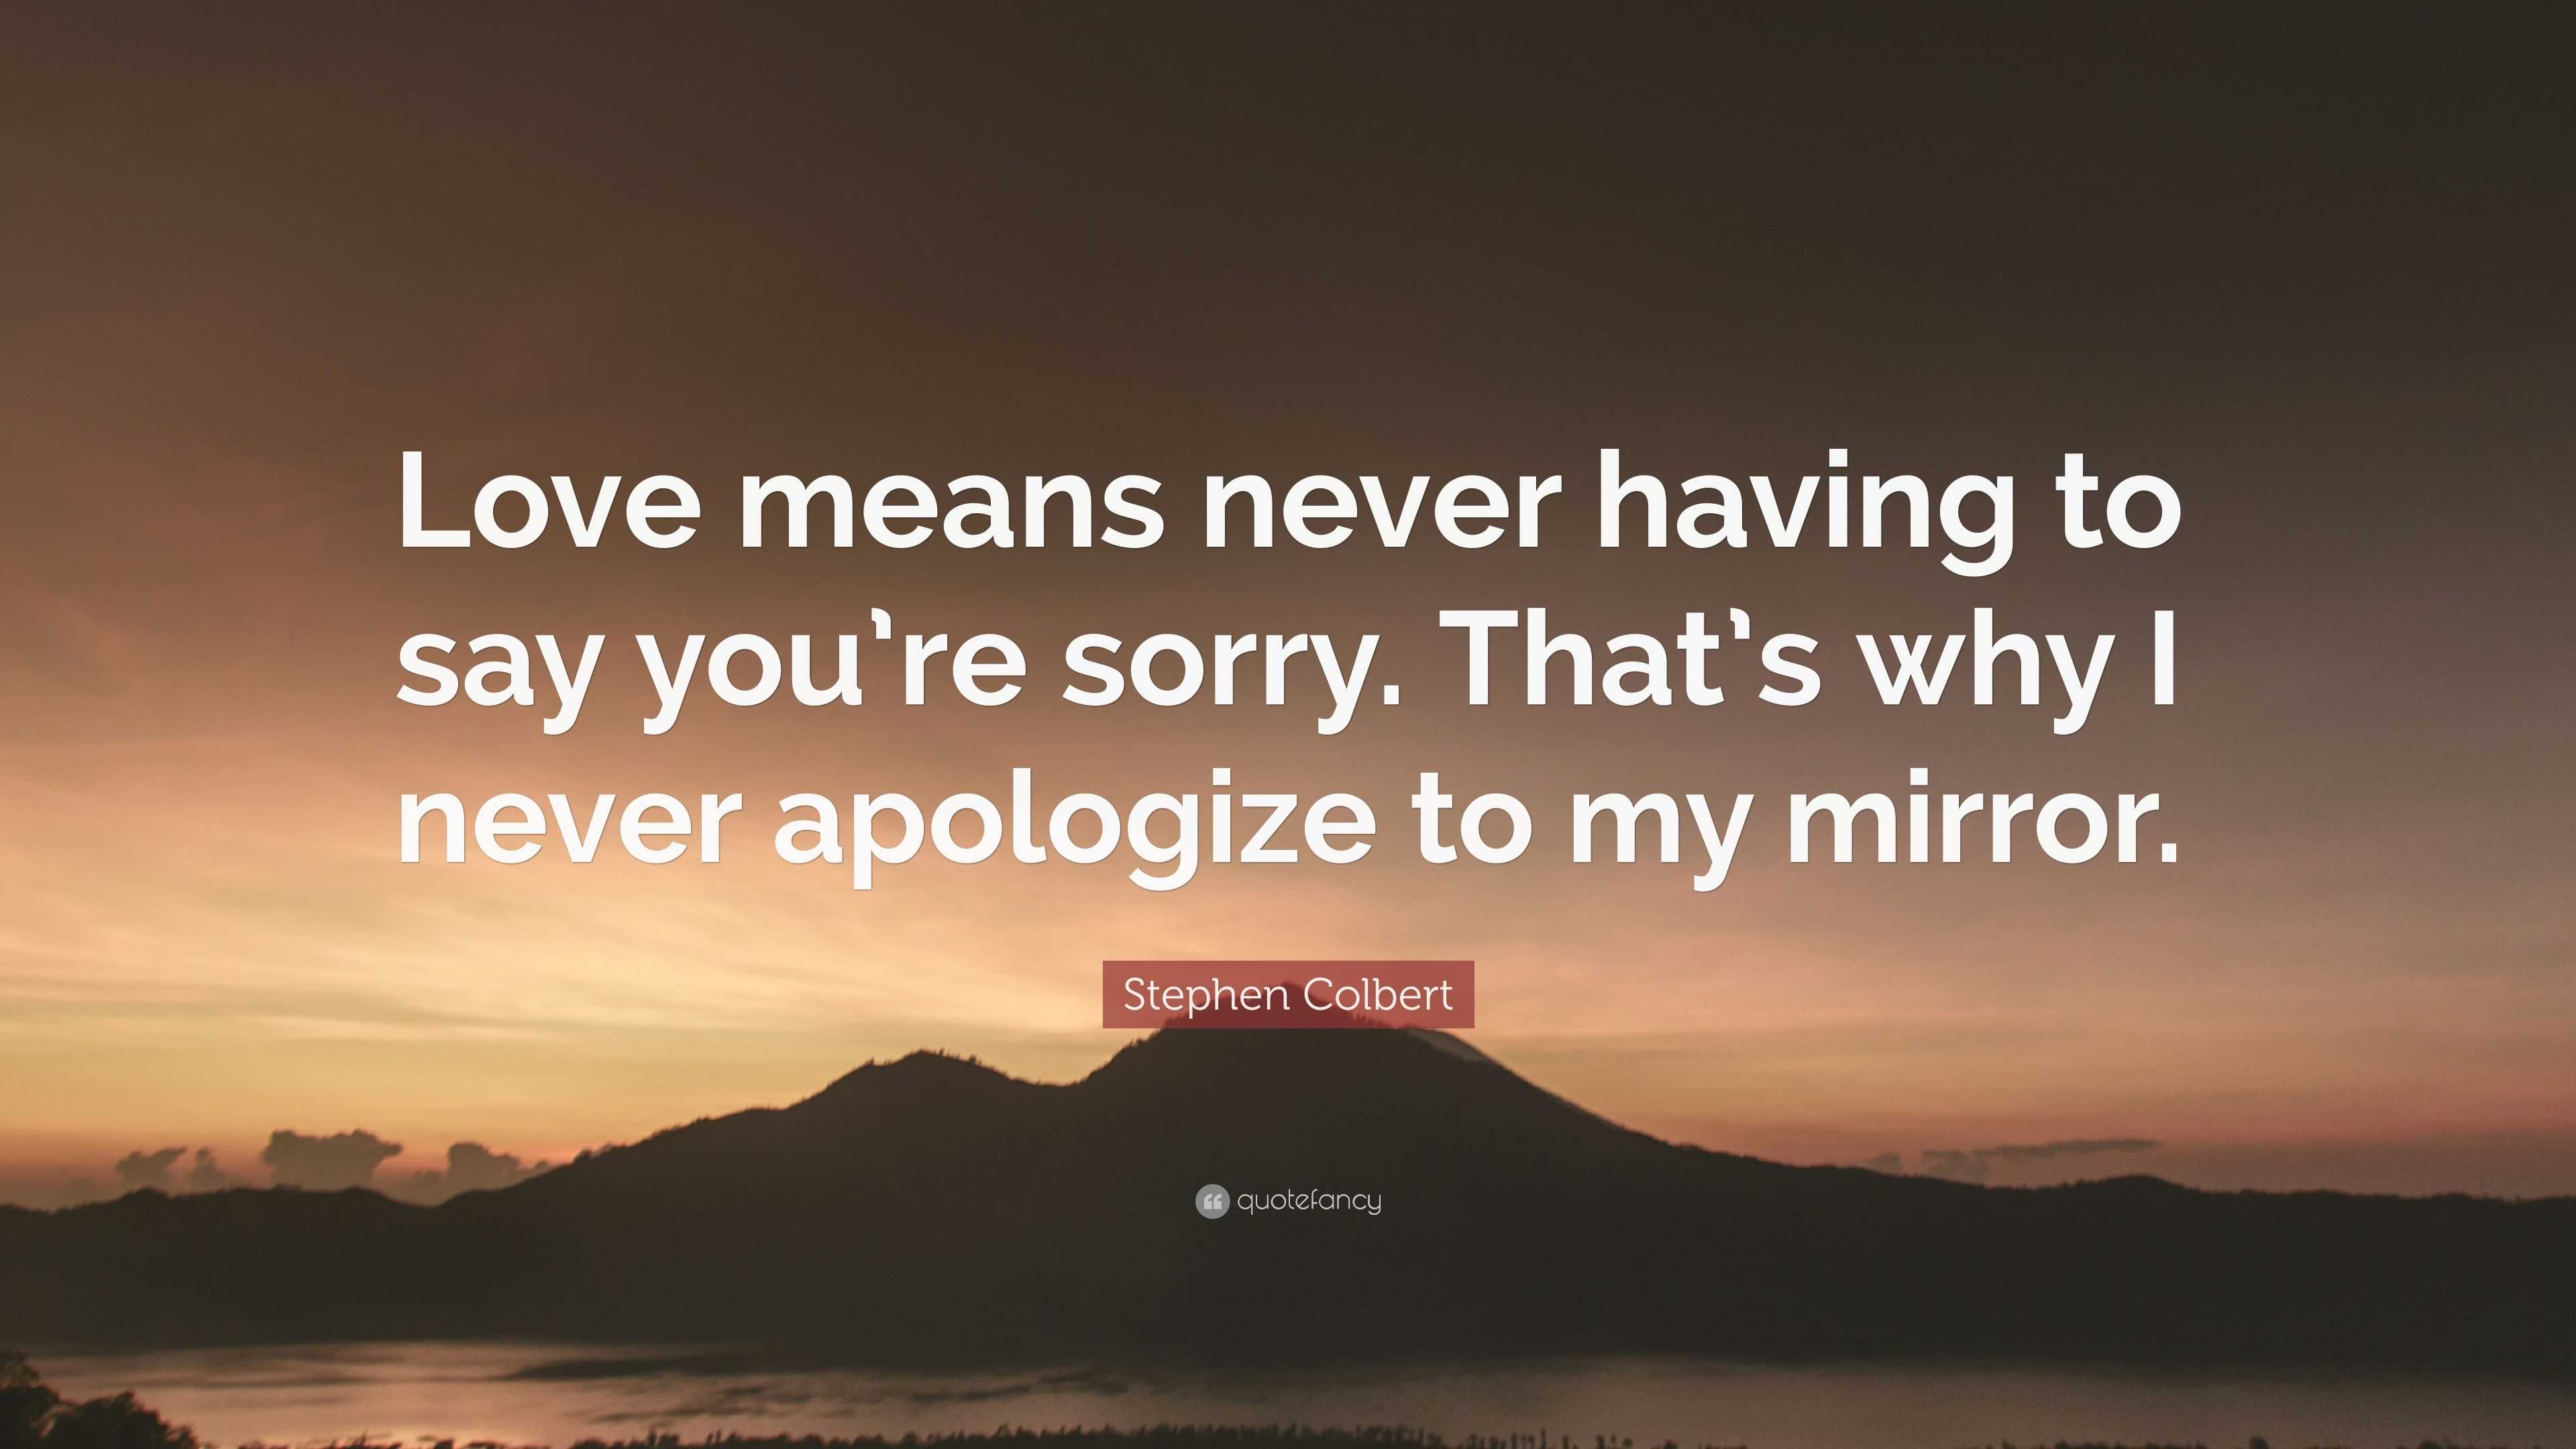 Stephen Colbert Quote “Love means never having to say you re sorry